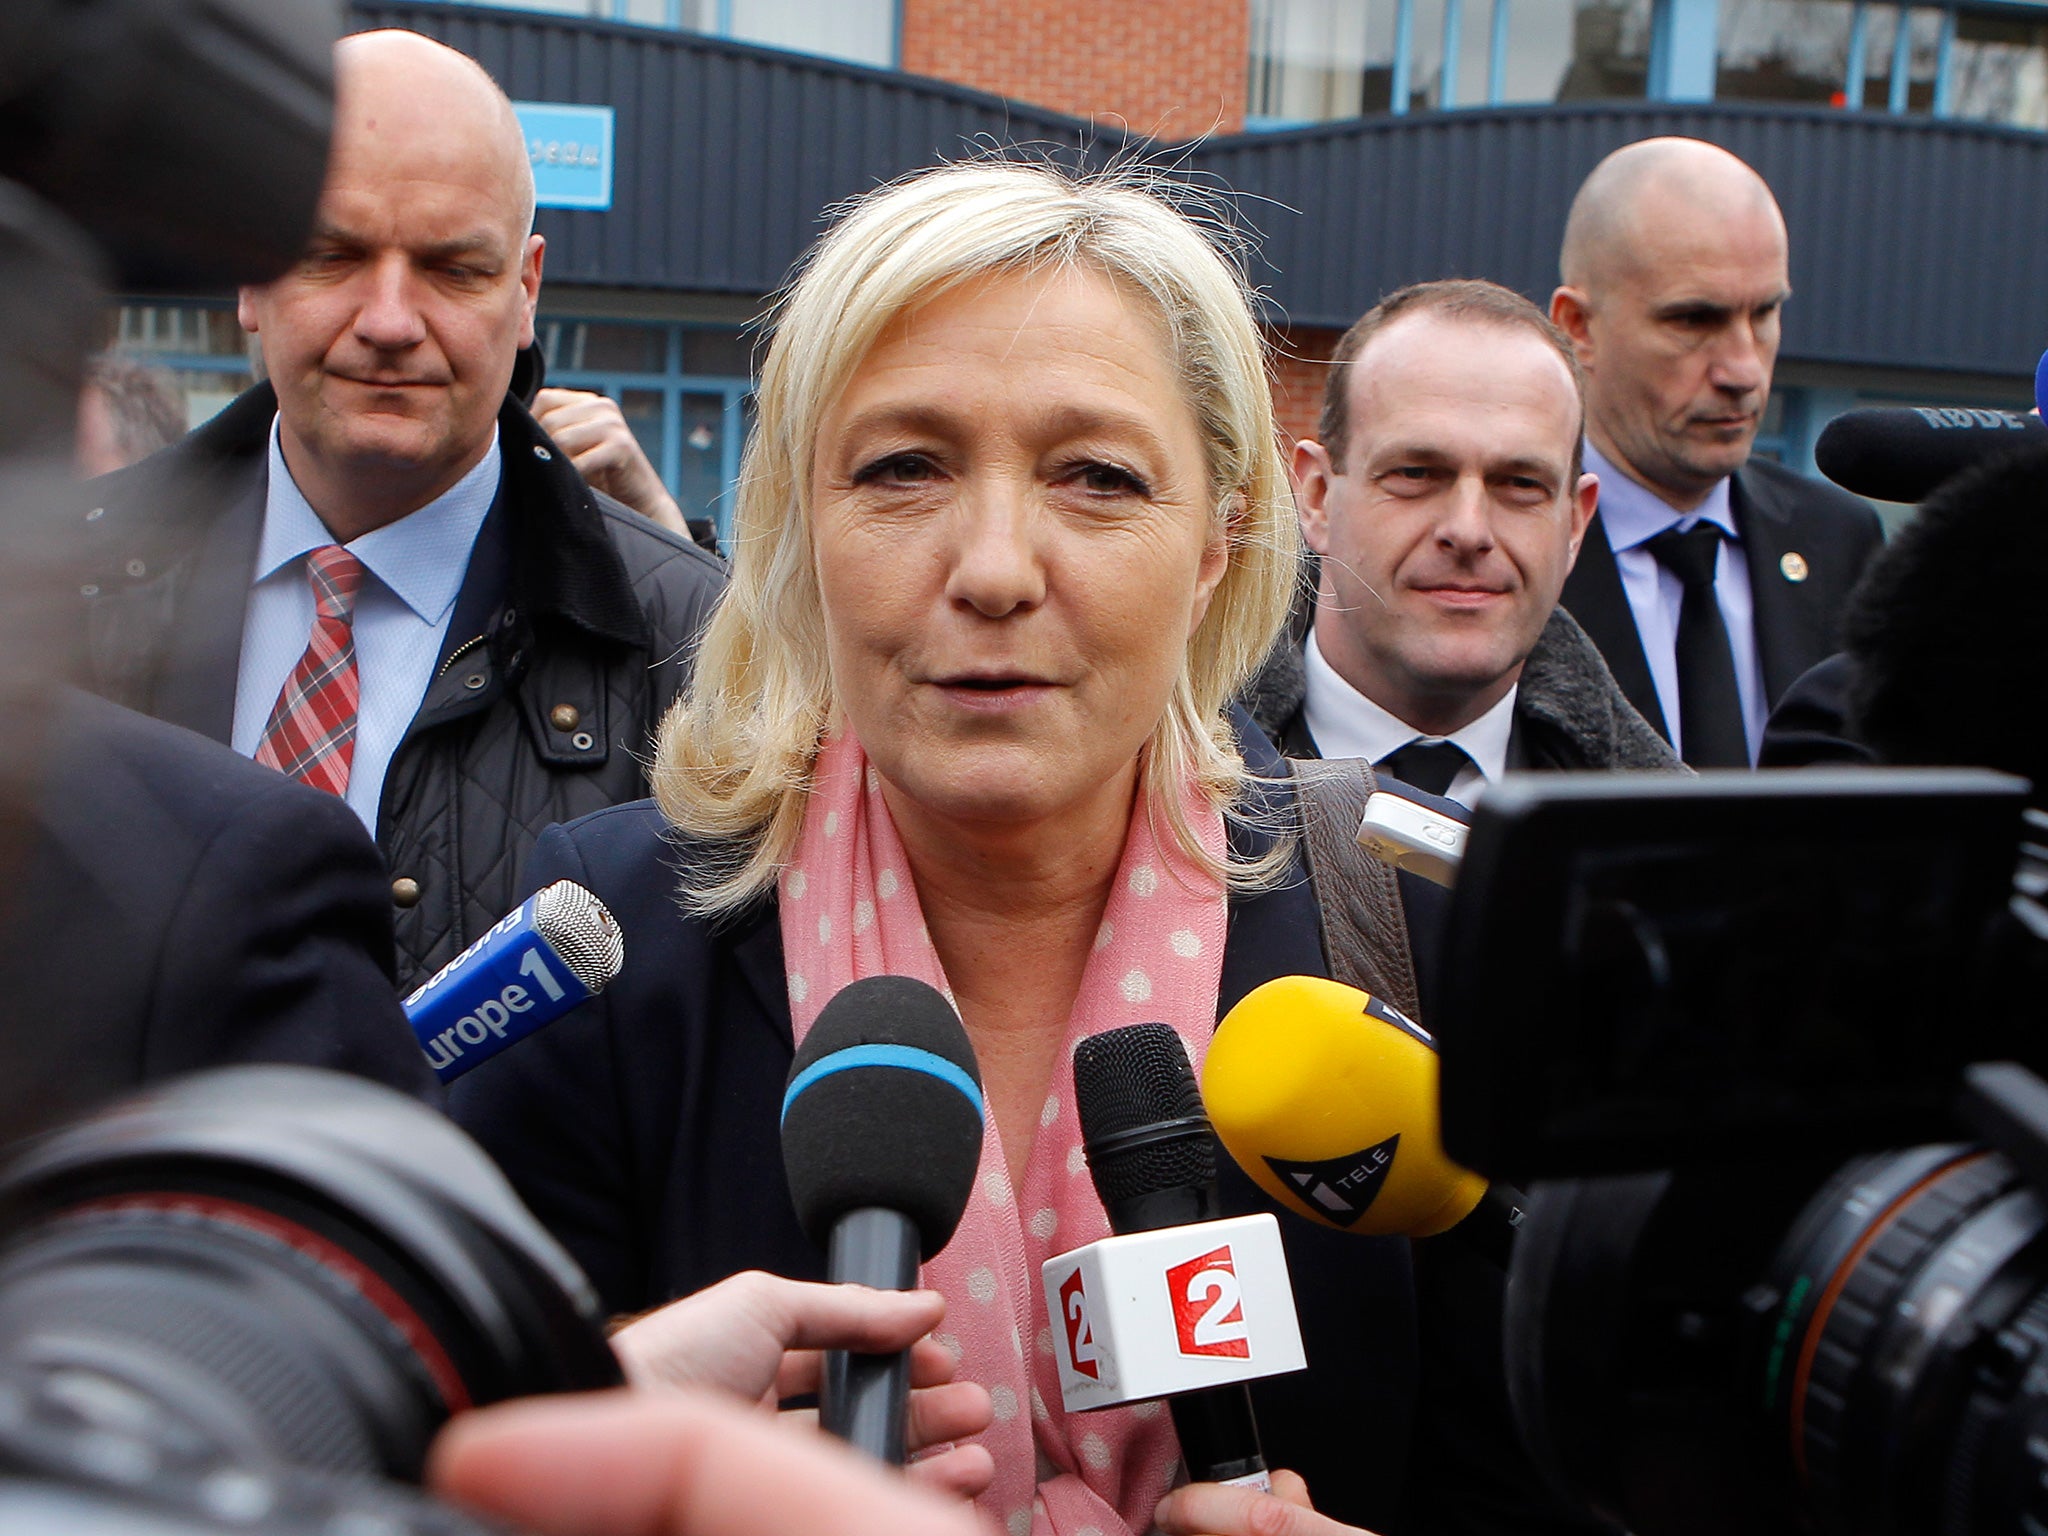 Ms Le Pen was riding high in the opinion polls